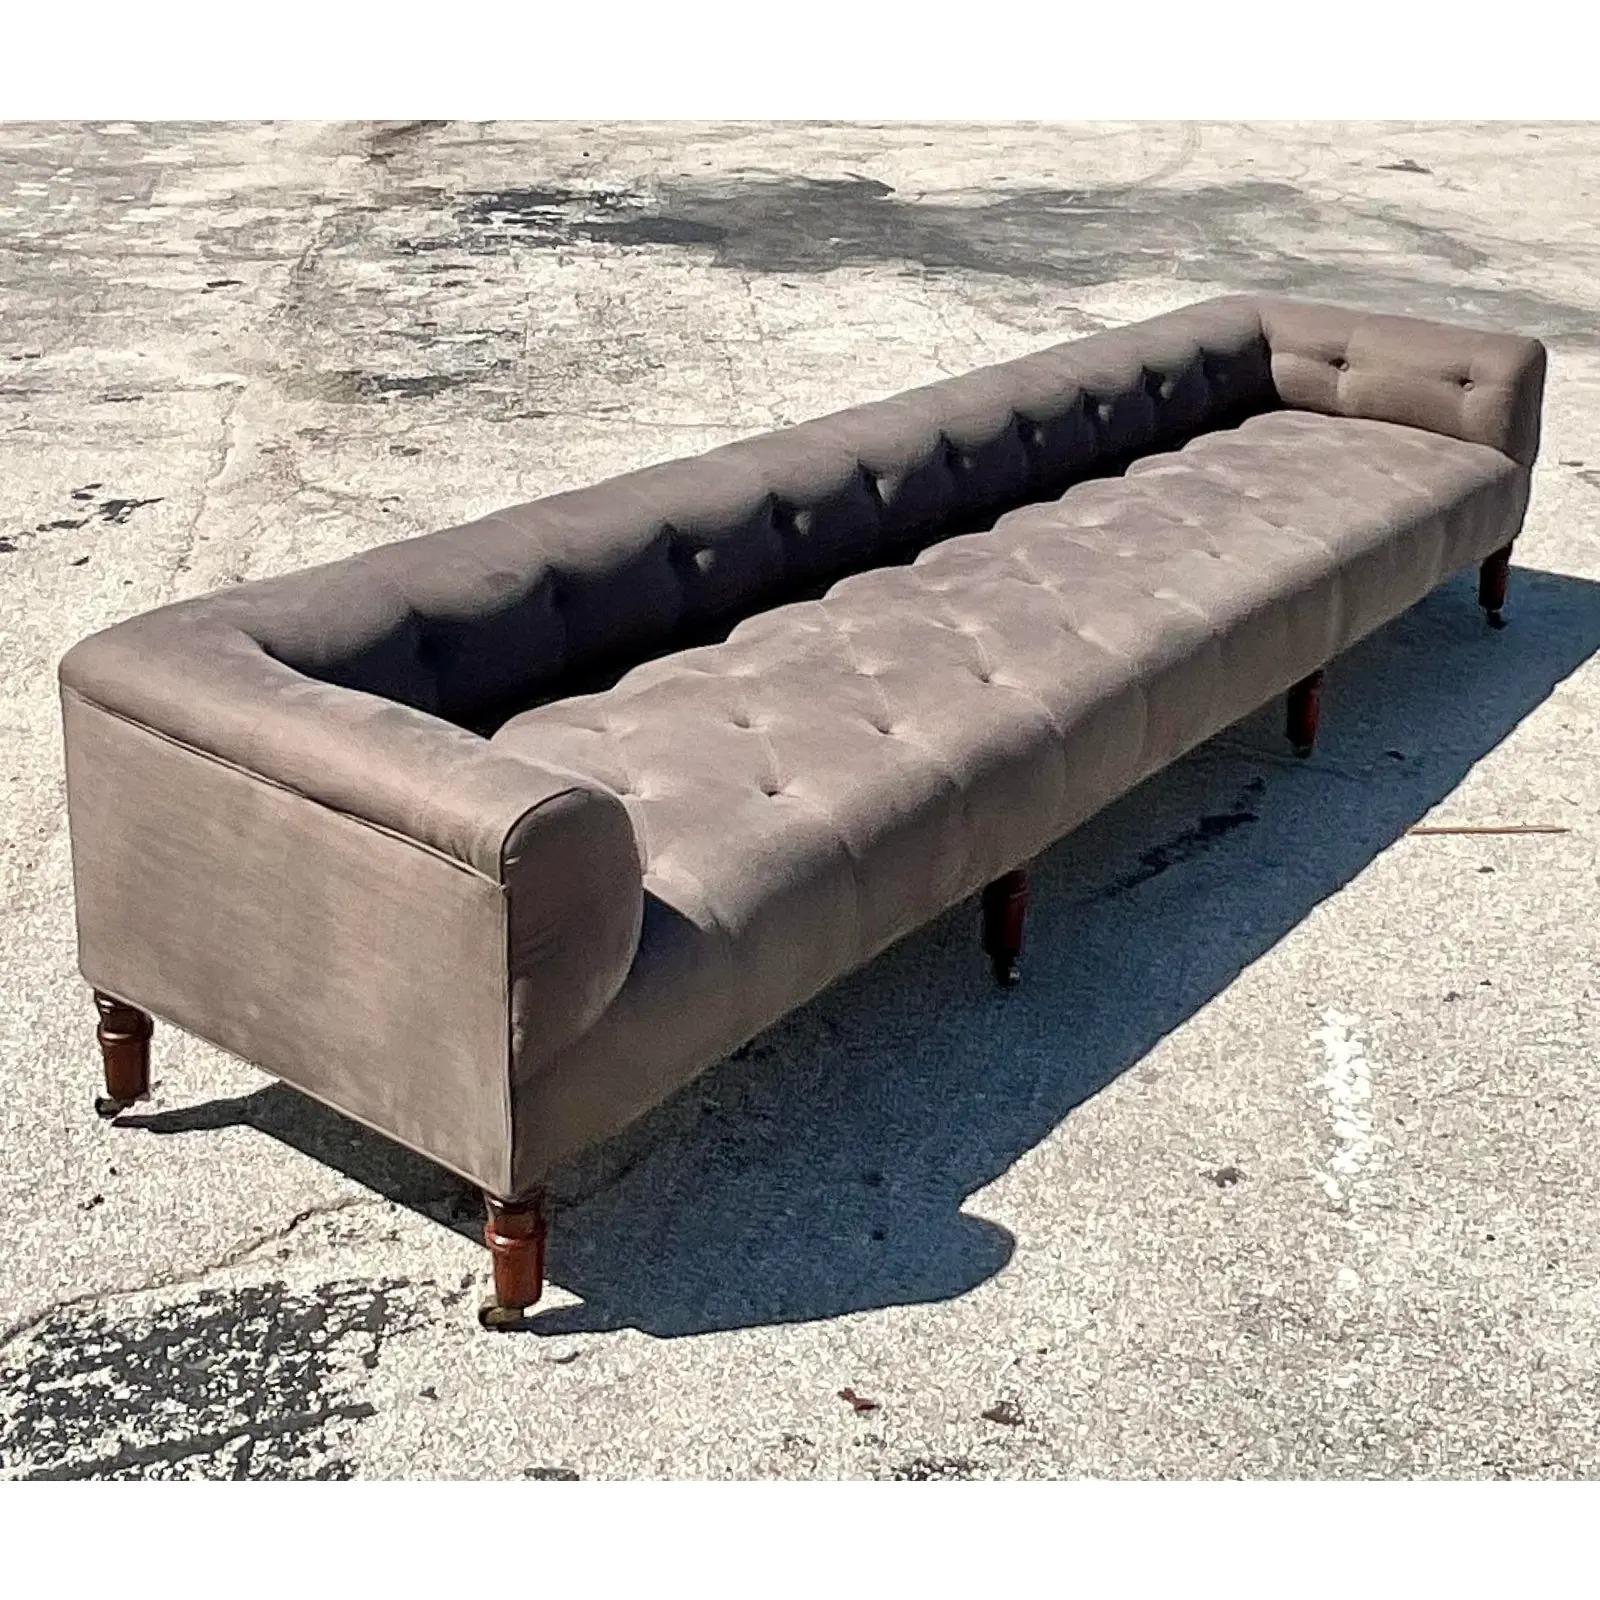 Fantastic vintage Boho tufted sofa. Made by the iconic John Derian company. Beautiful Belgian linen with a chic 9ft frame. Low profile with turned wood legs on casters. Acquired from a Palm Beach estate. Measure: 9ft.